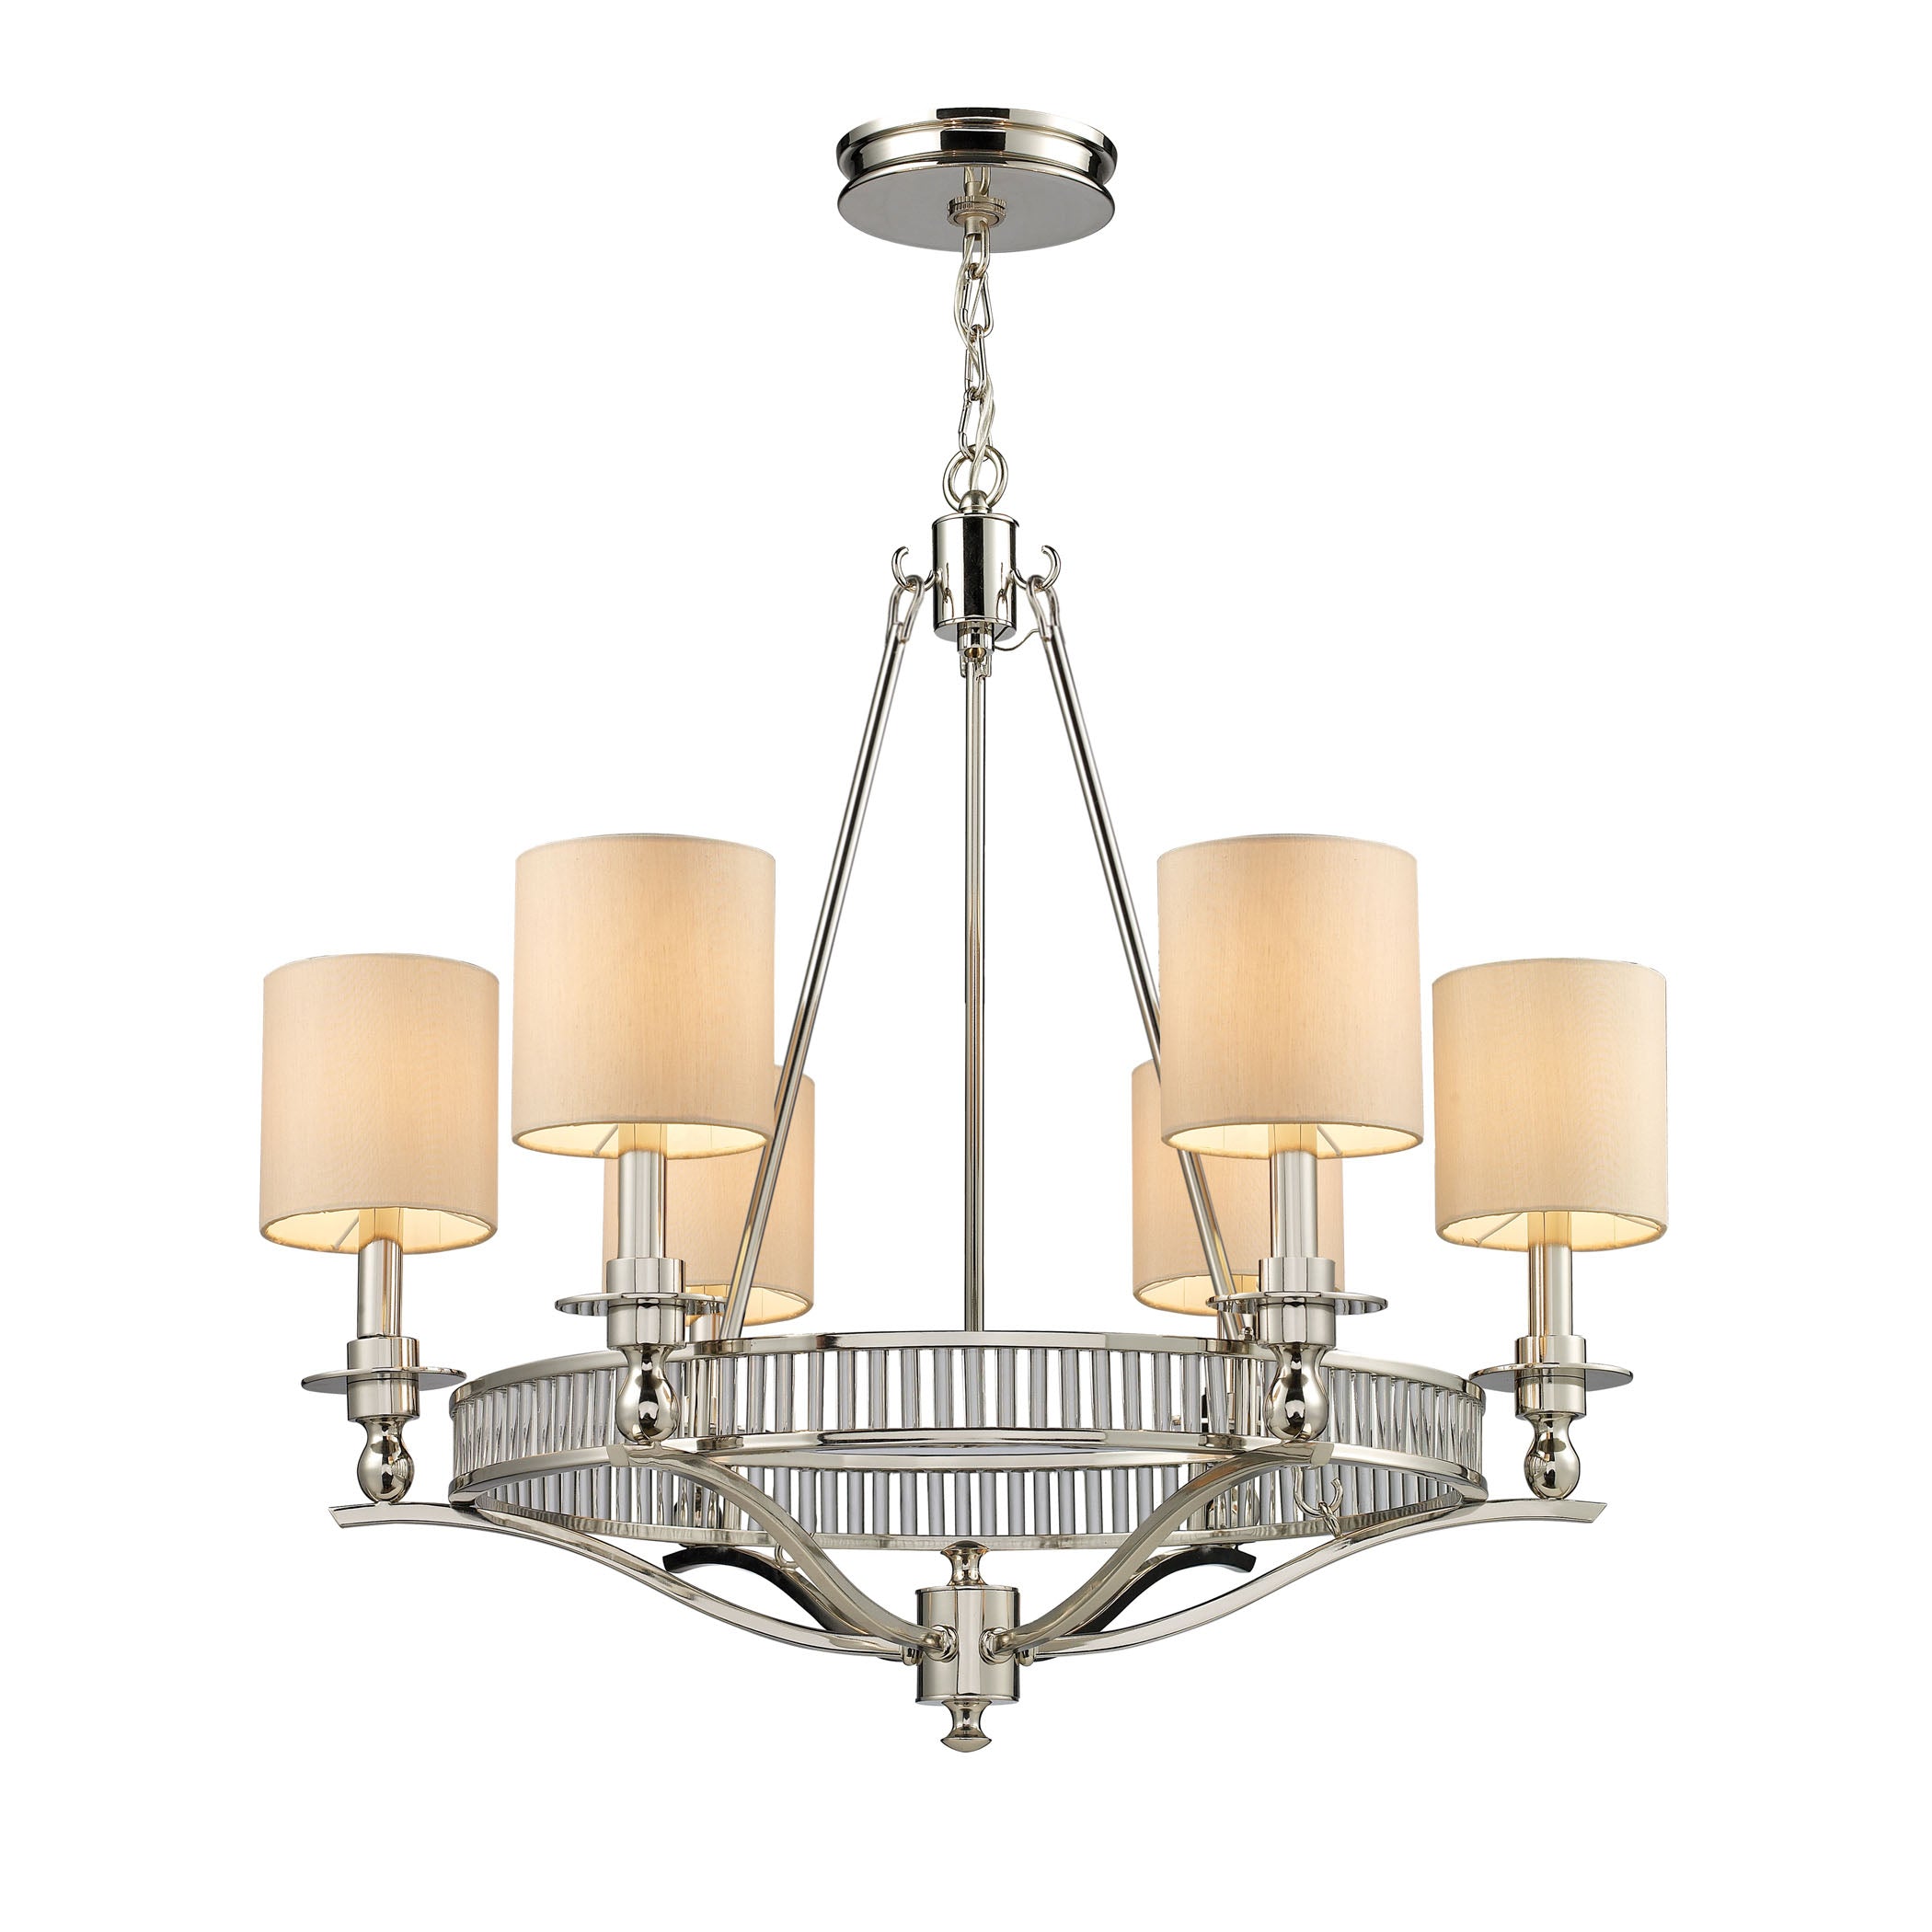 ELK Lighting 10167/6 Braxton 6-Light Chandelier in Polished Nickel with Tan Fabric Shades